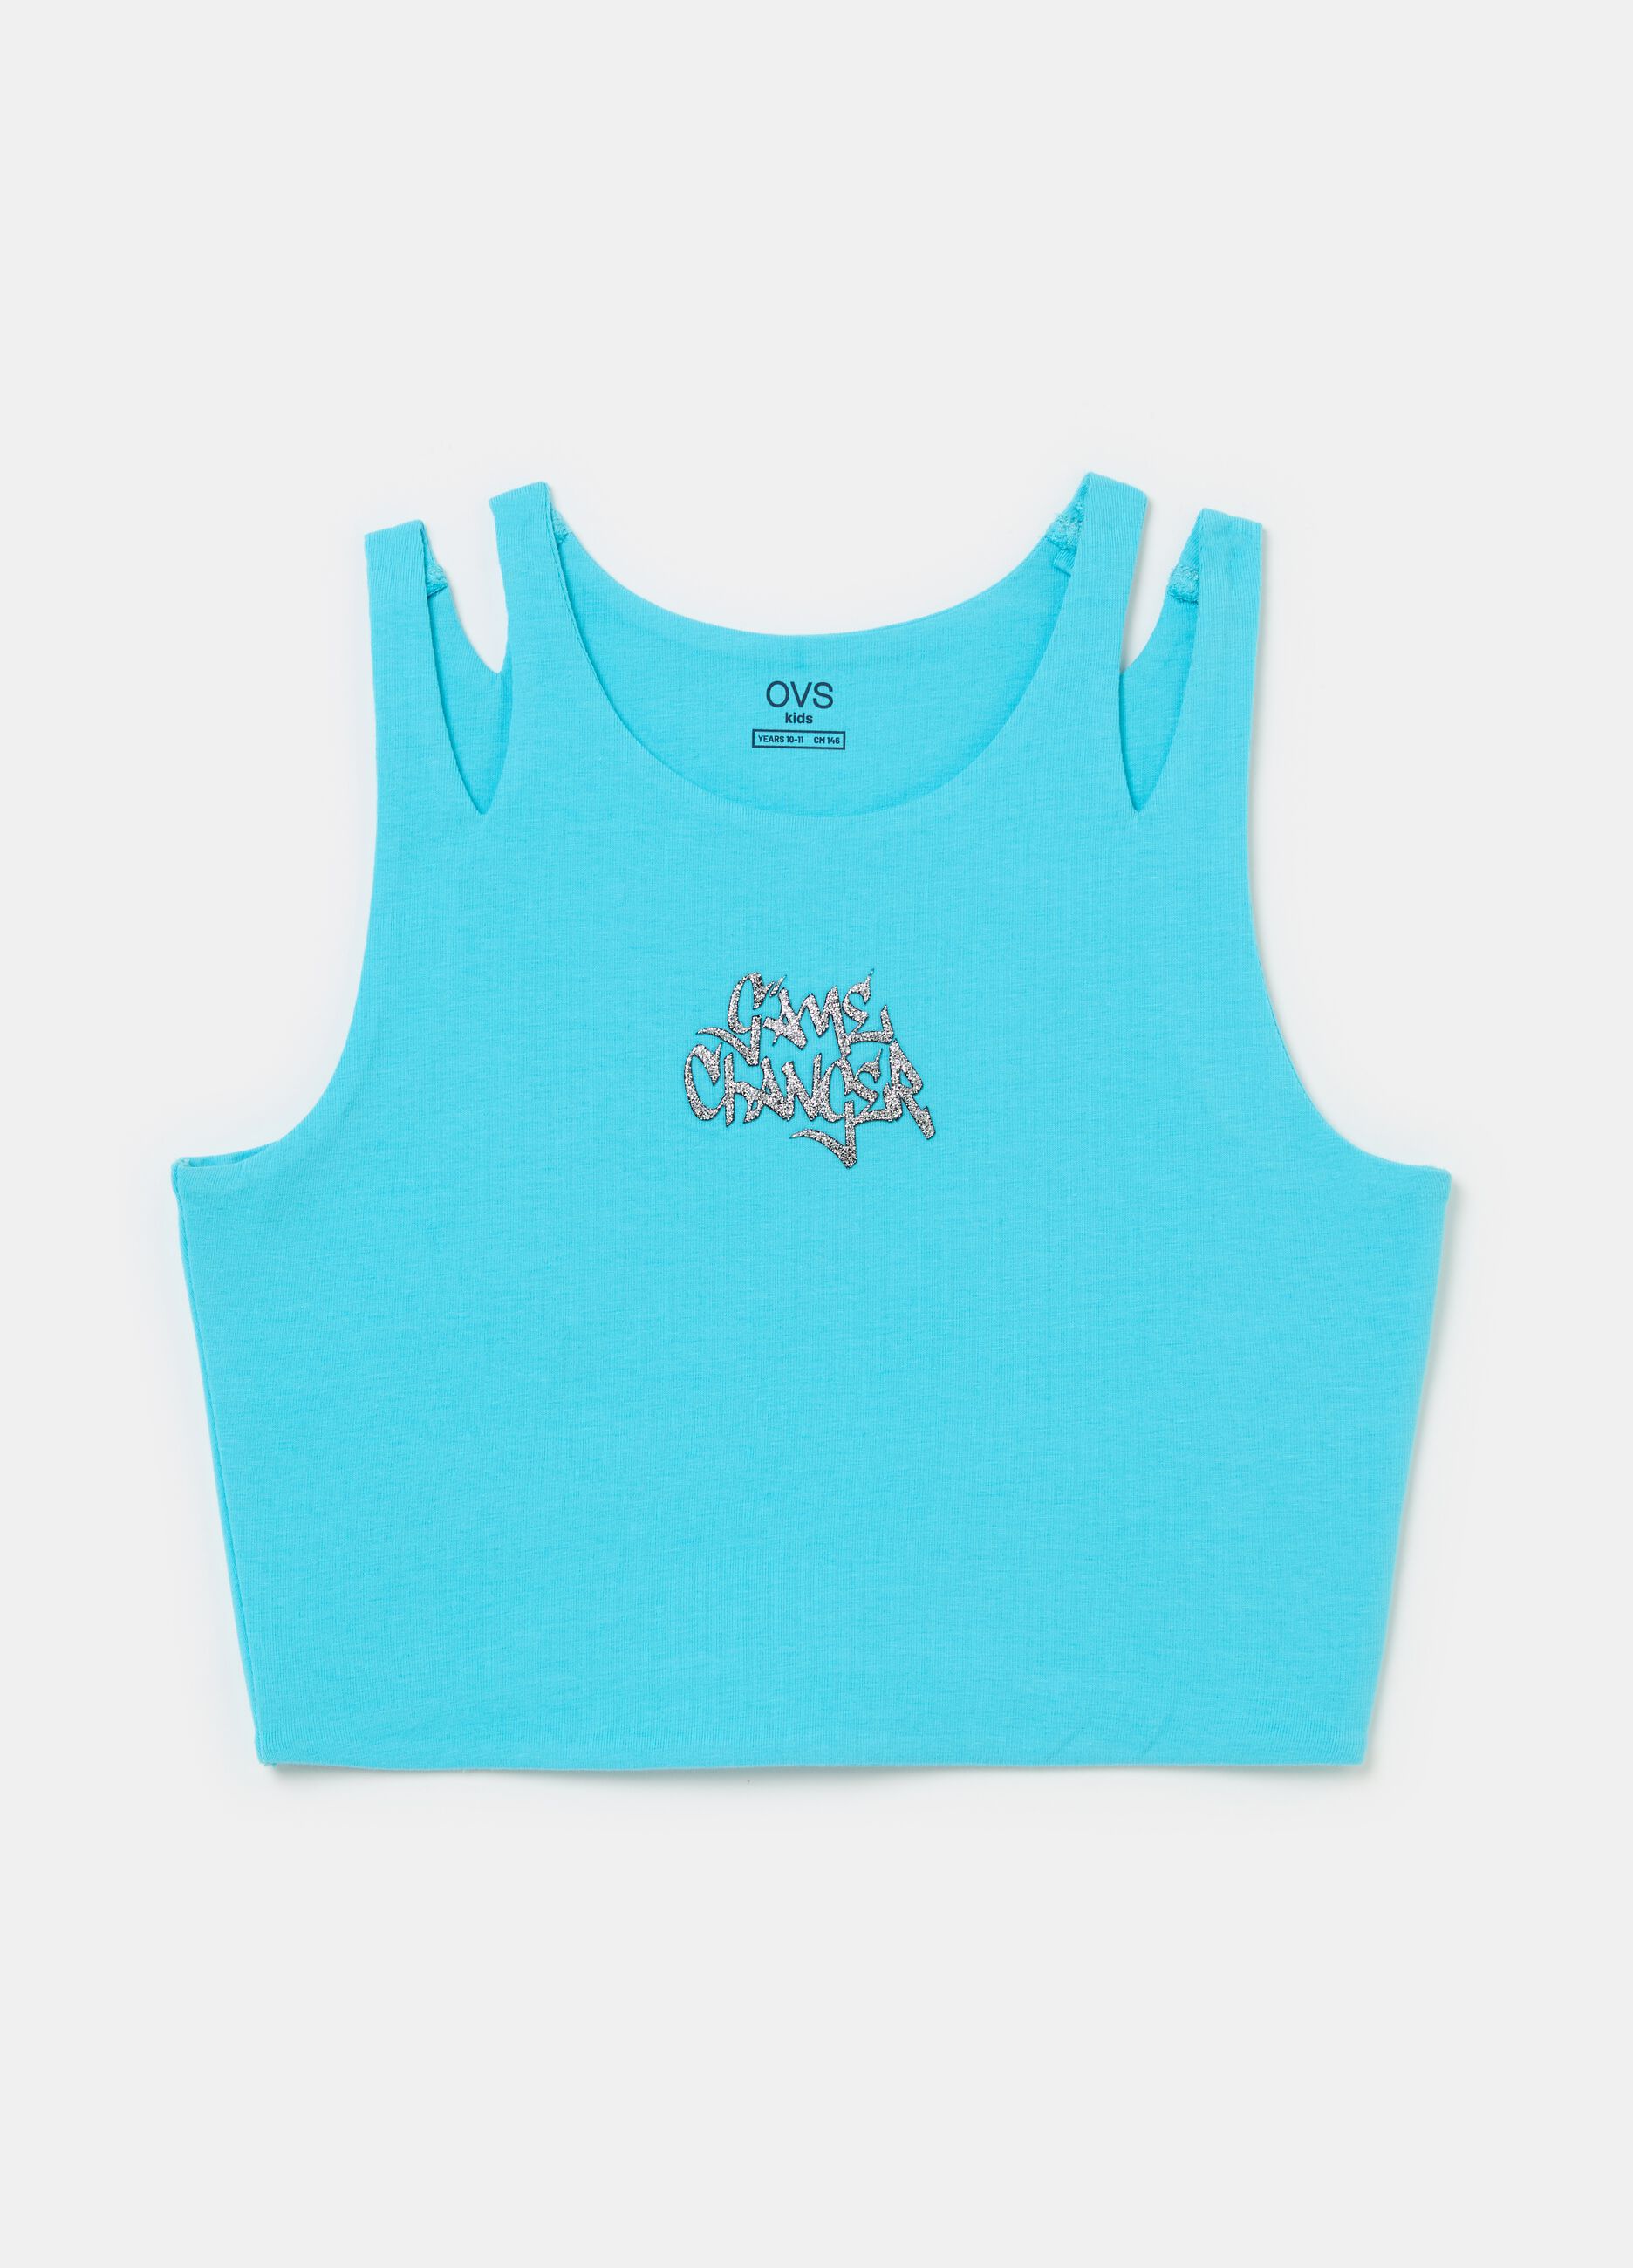 Crop tank top with cut-out details